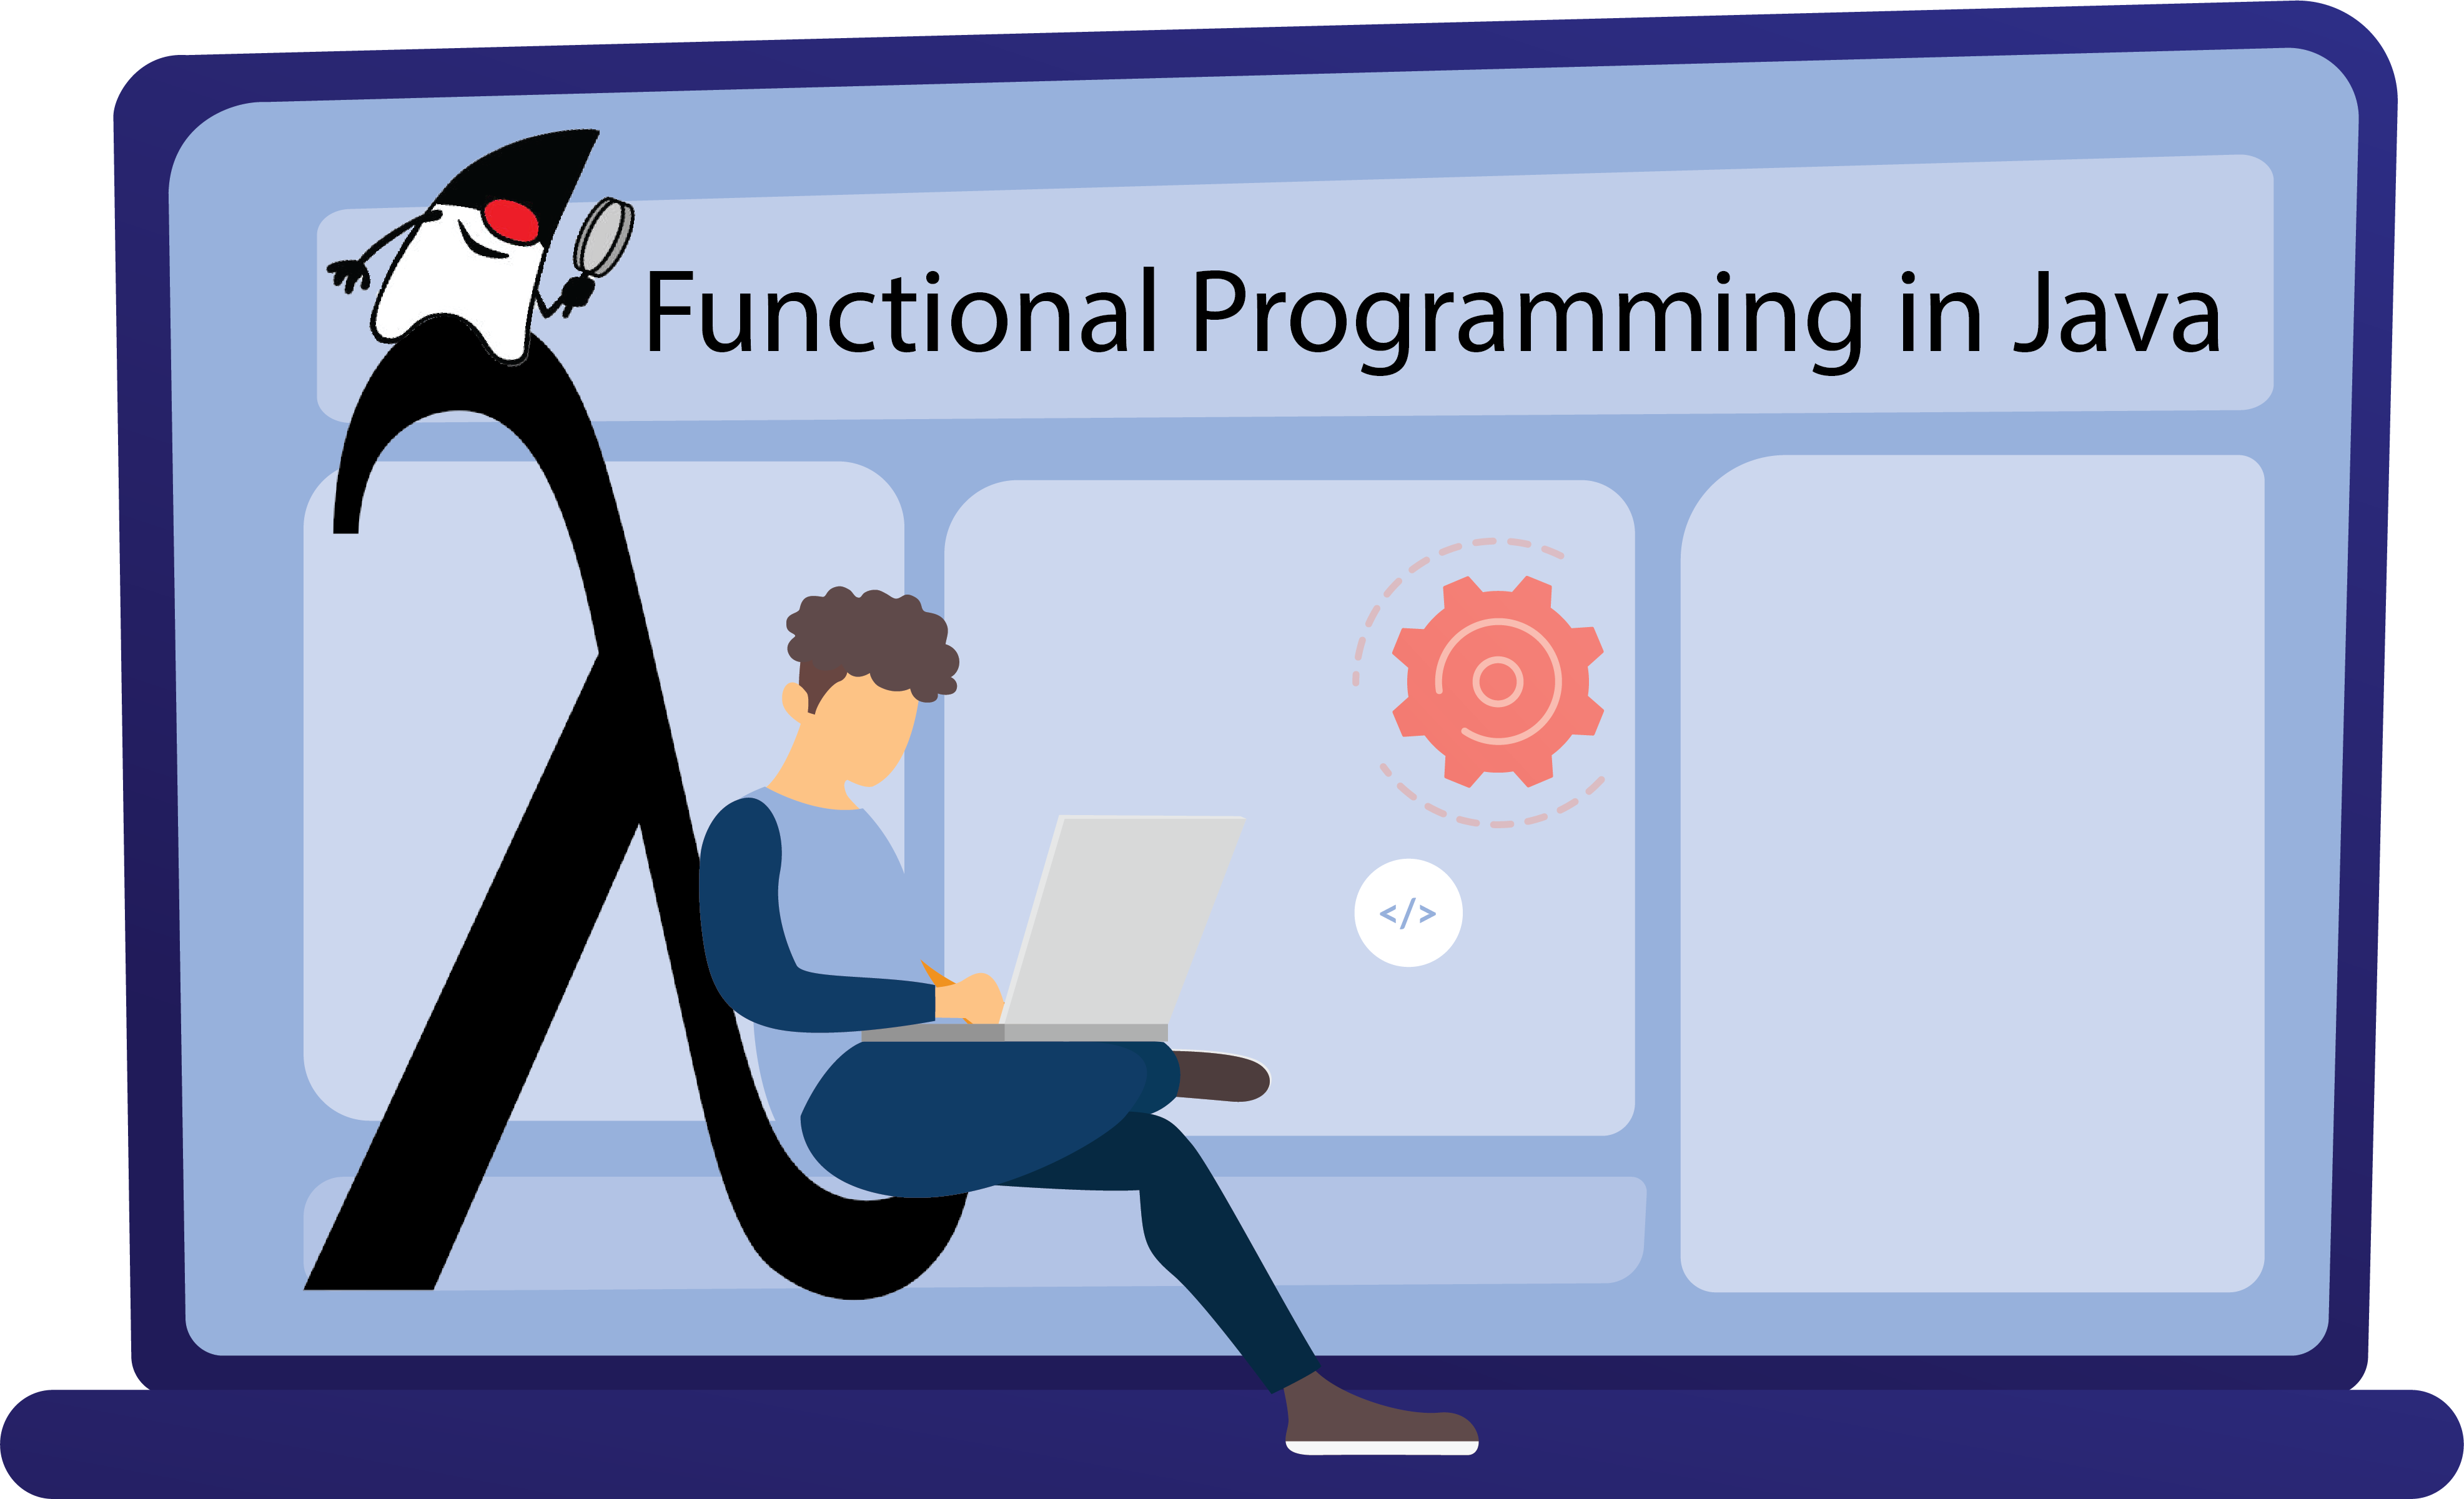 How do I become proficient with functional programming in Java